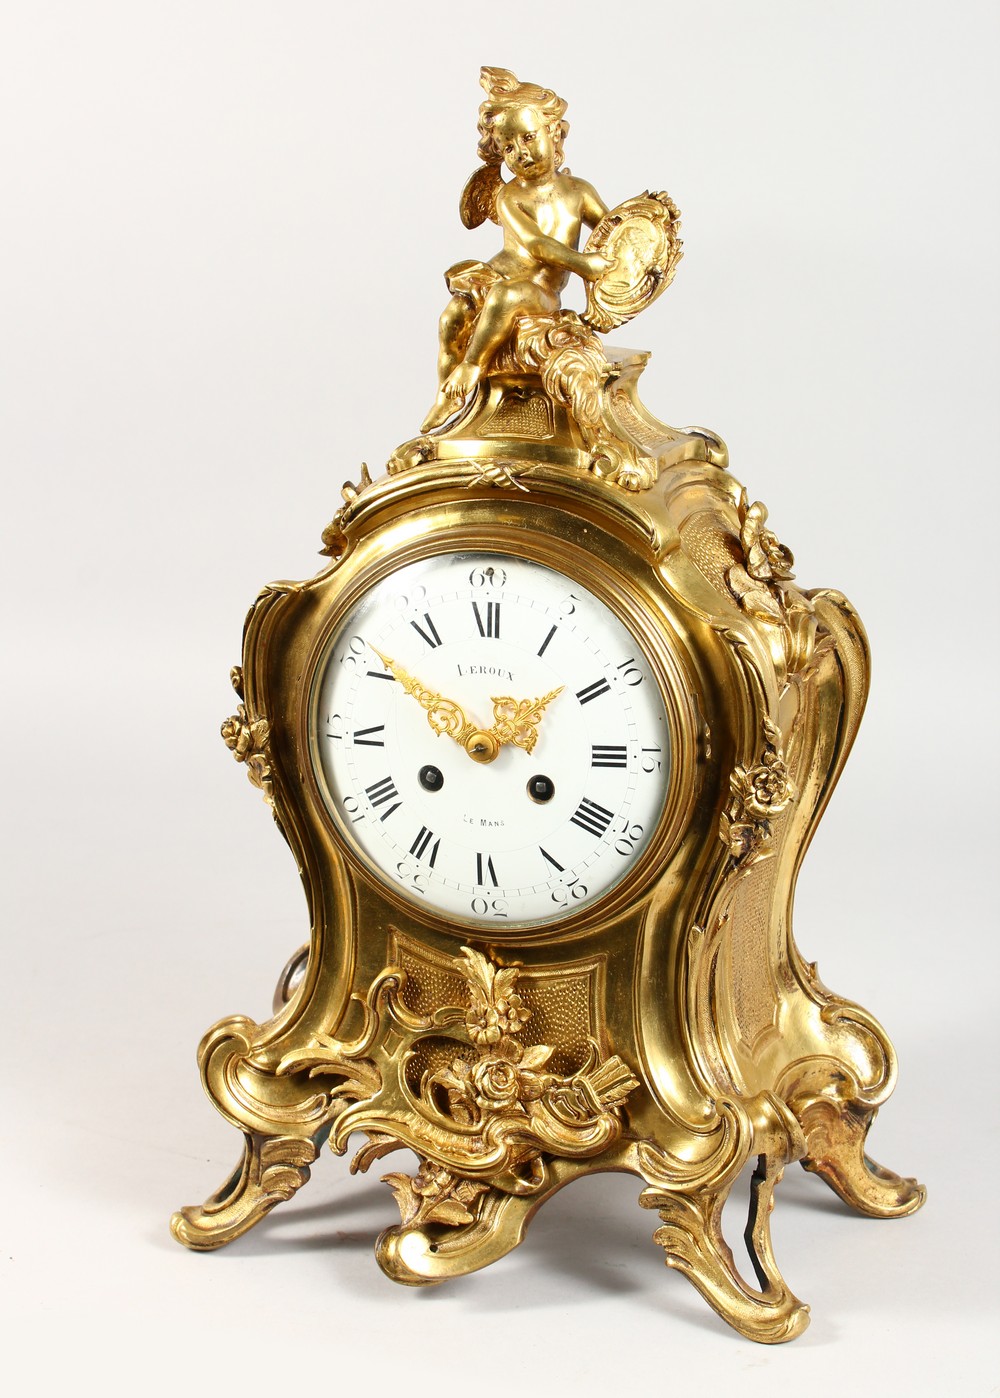 A GOOD LOUIS XVI HEAVY ORMOLU CLOCK by LEROUX, LE MANS, the case with cupids, scrolls, acanthus